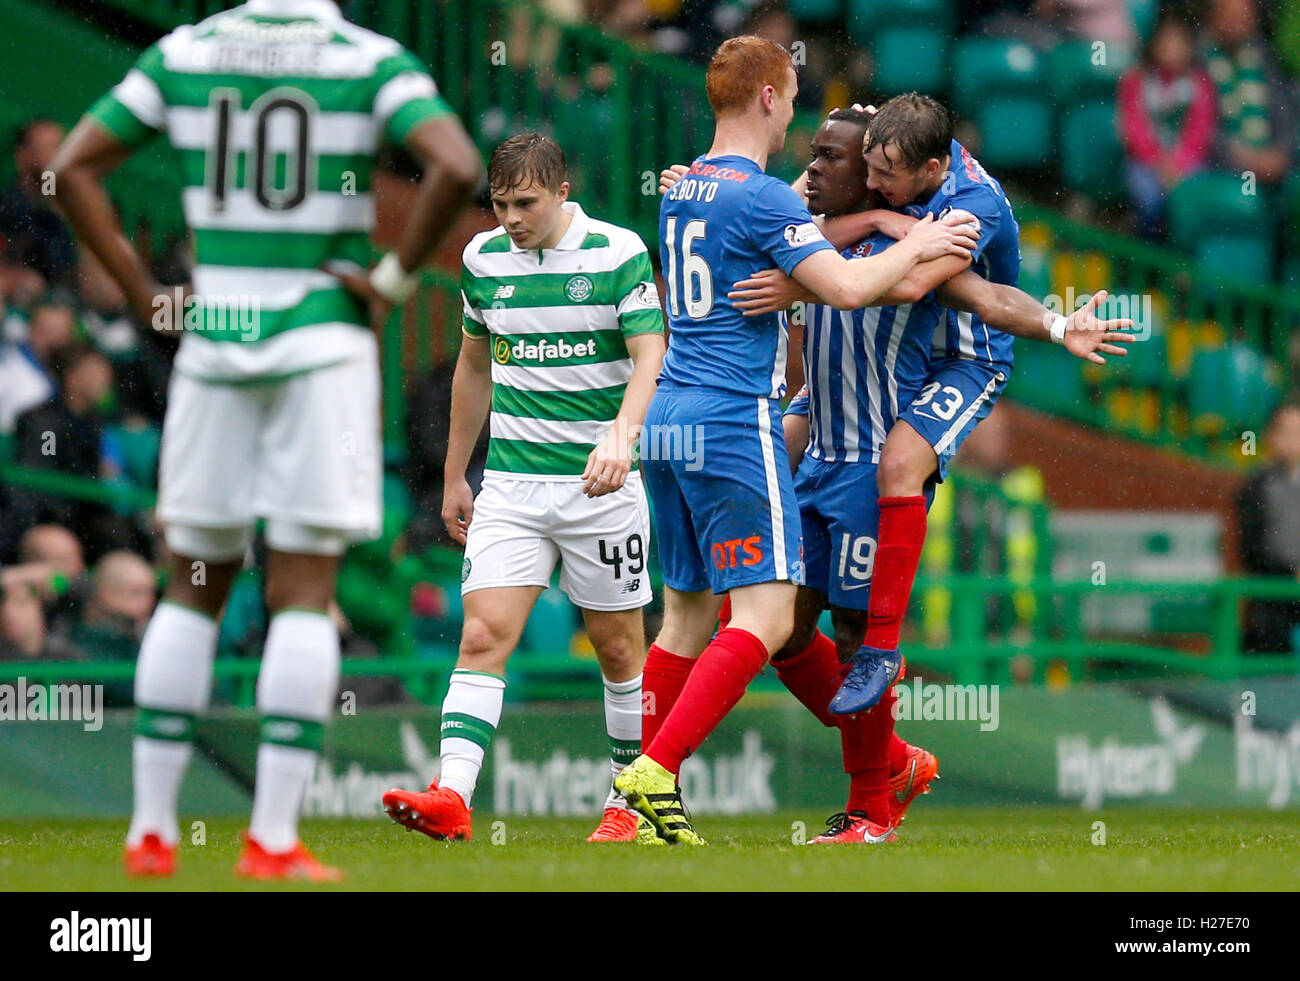 Kilmarnock's Souleymane Coulibaly celebrates scoring his side's first goal of the game during the Ladbrokes Scottish Premiership match at Celtic Park, Glasgow. PRESS ASSOCIATION Photo. Picture date: Saturday September 24, 2016. See PA story SOCCER Celtic. Photo credit should read: Jane Barlow/PA Wire. Stock Photo